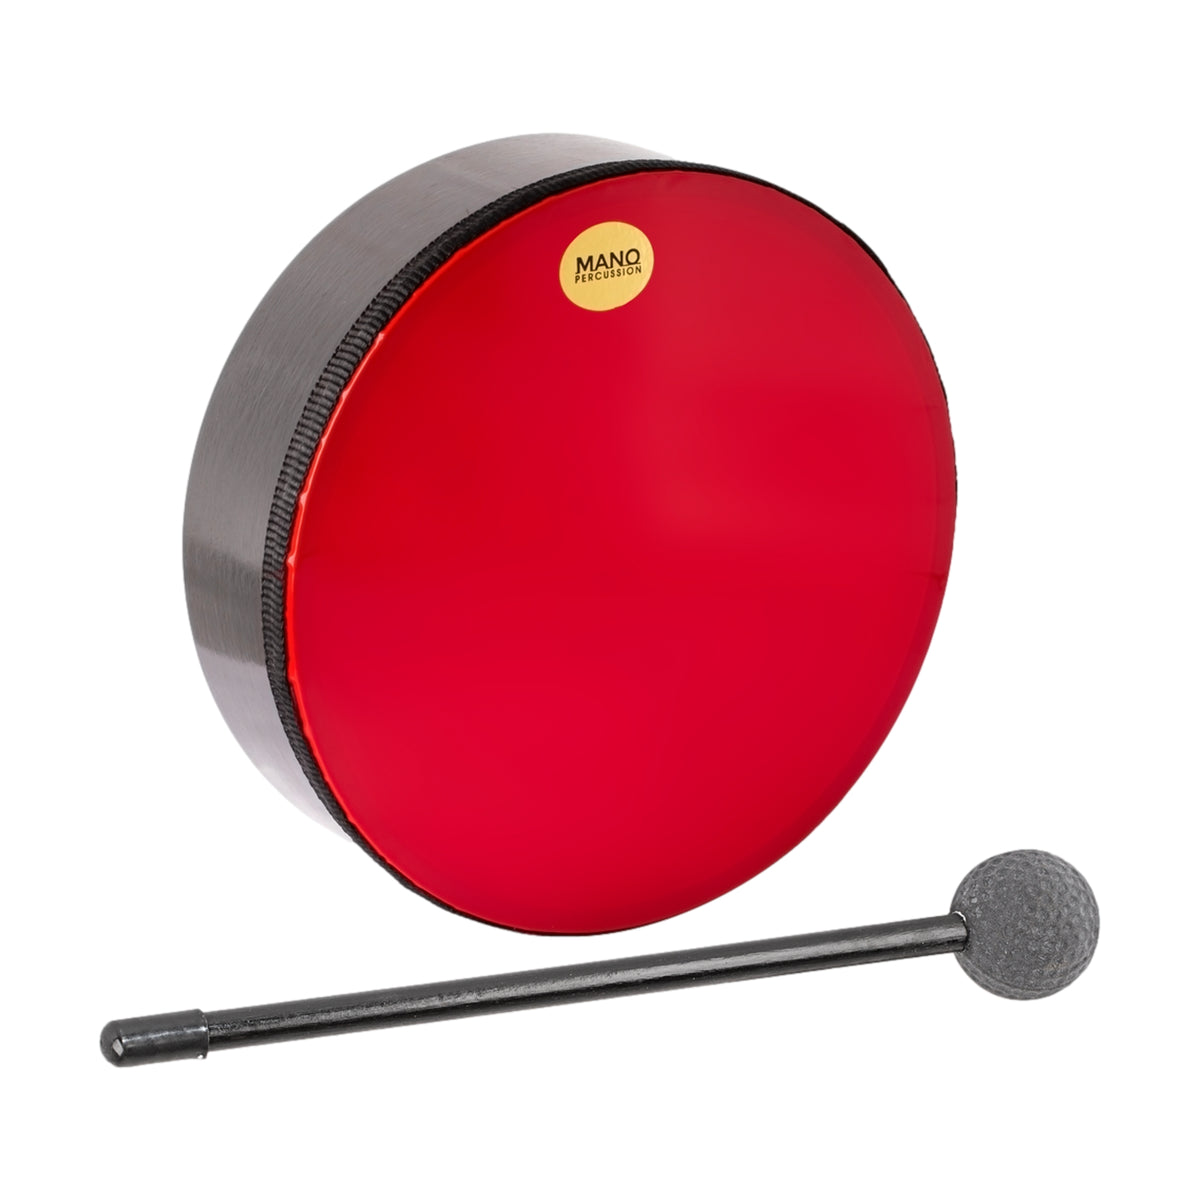 Mano Percussion 8 Inch Hand Drum Red